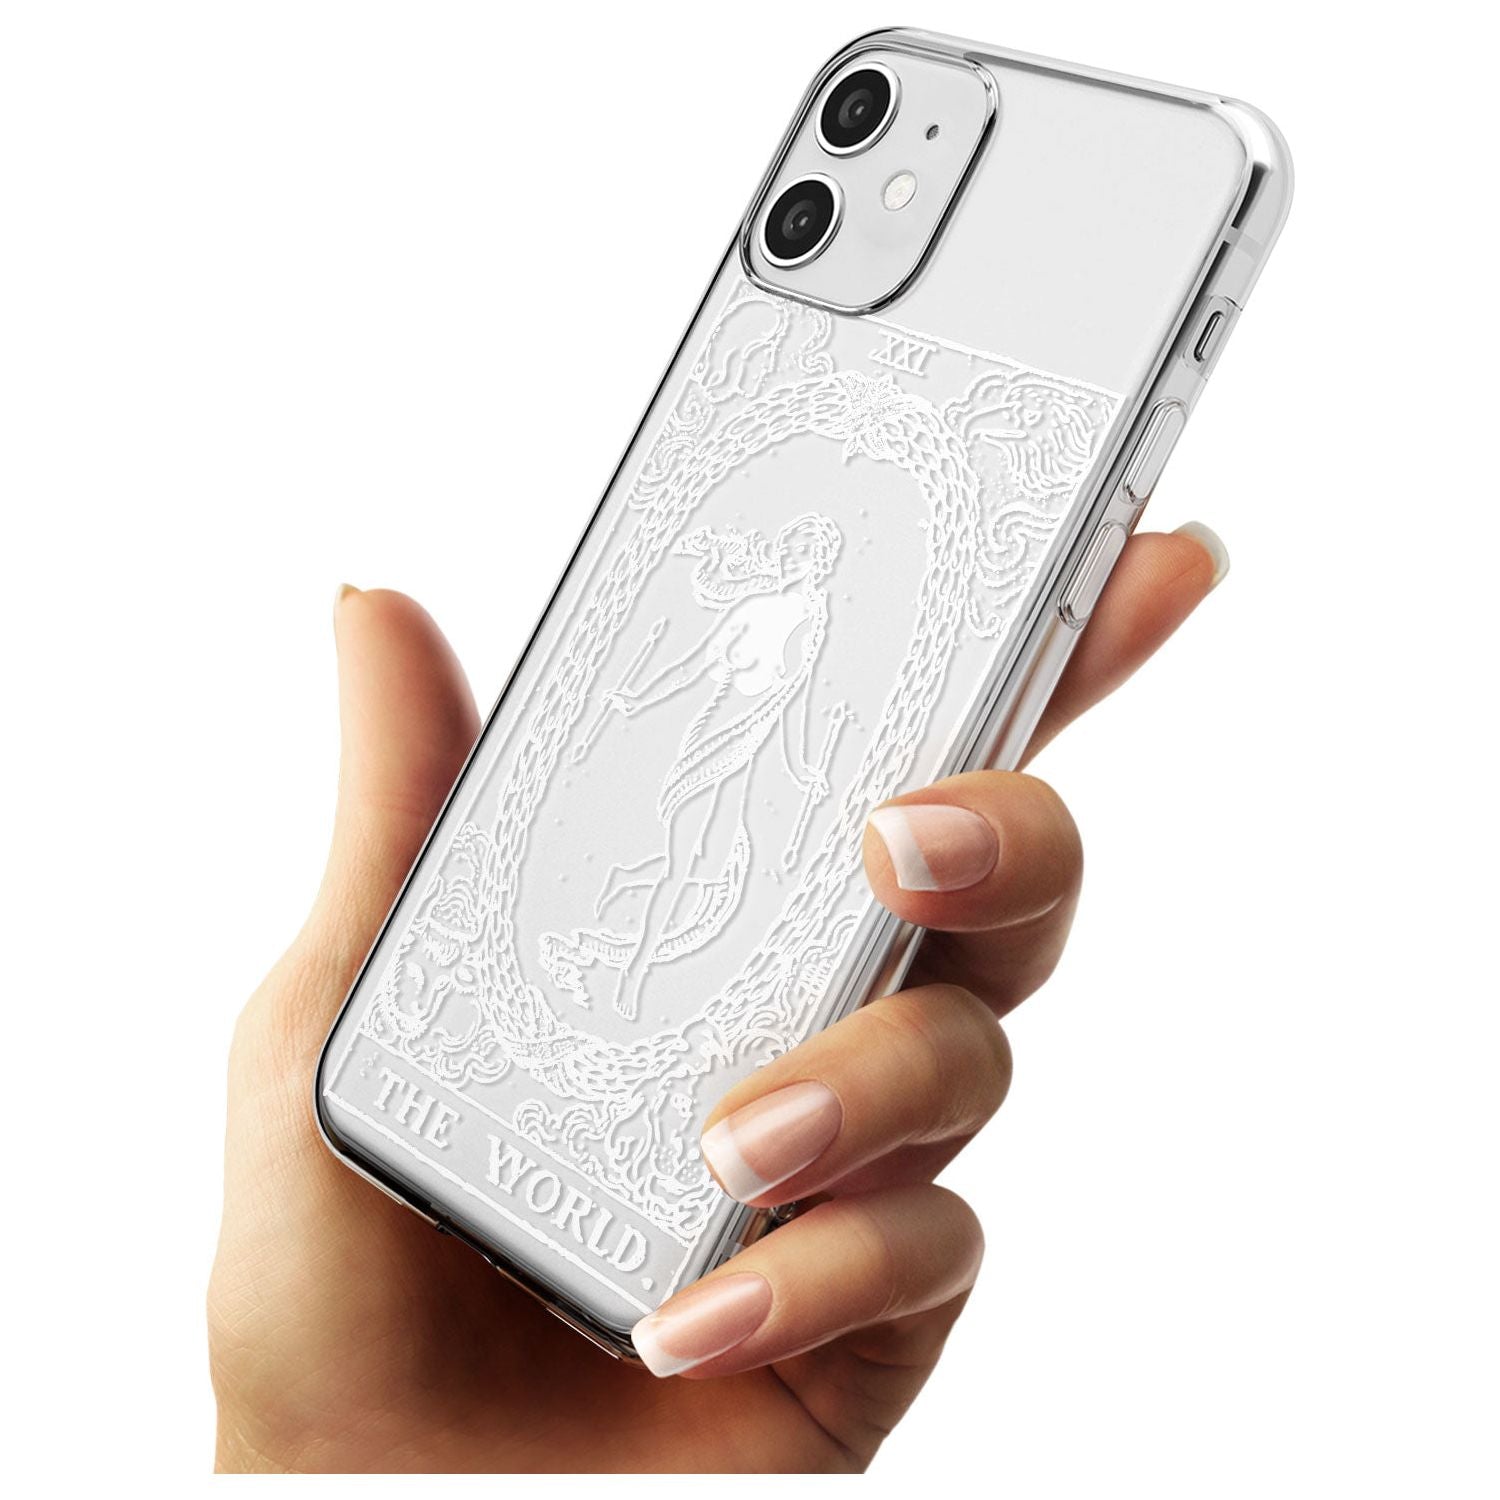 The World Tarot Card - White Transparent Black Impact Phone Case for iPhone 11